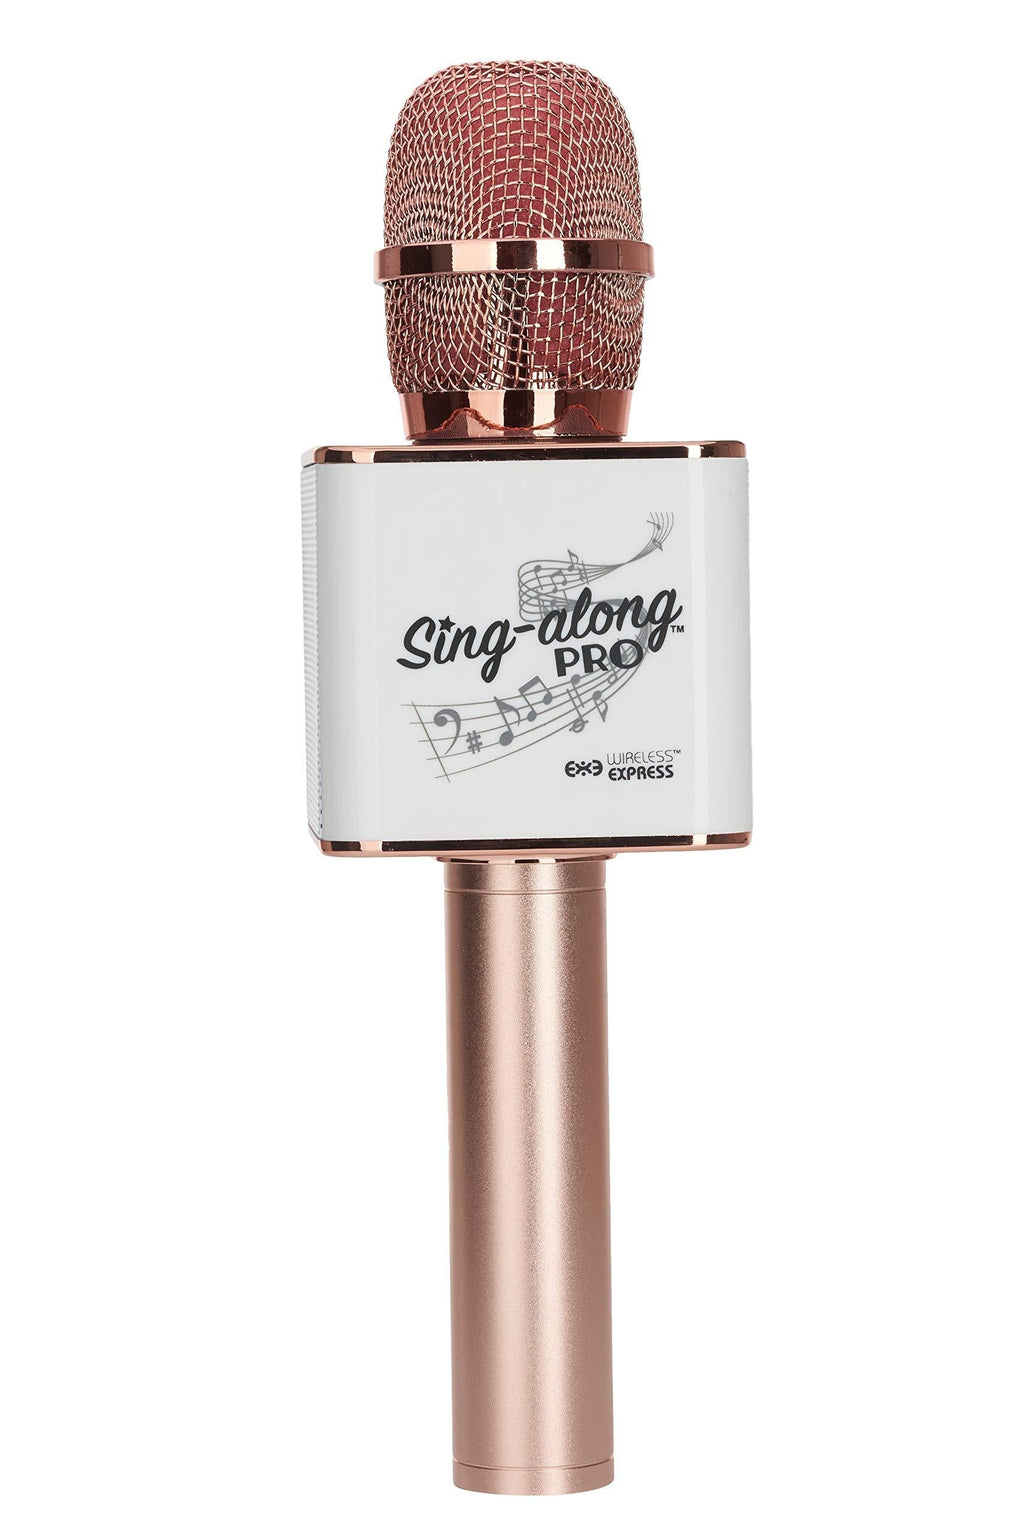 [AUSTRALIA] - Sing-along PRO Bluetooth Karaoke Microphone and Bluetooth Stereo Speaker All-in-one (Rose Gold) Rose Gold 